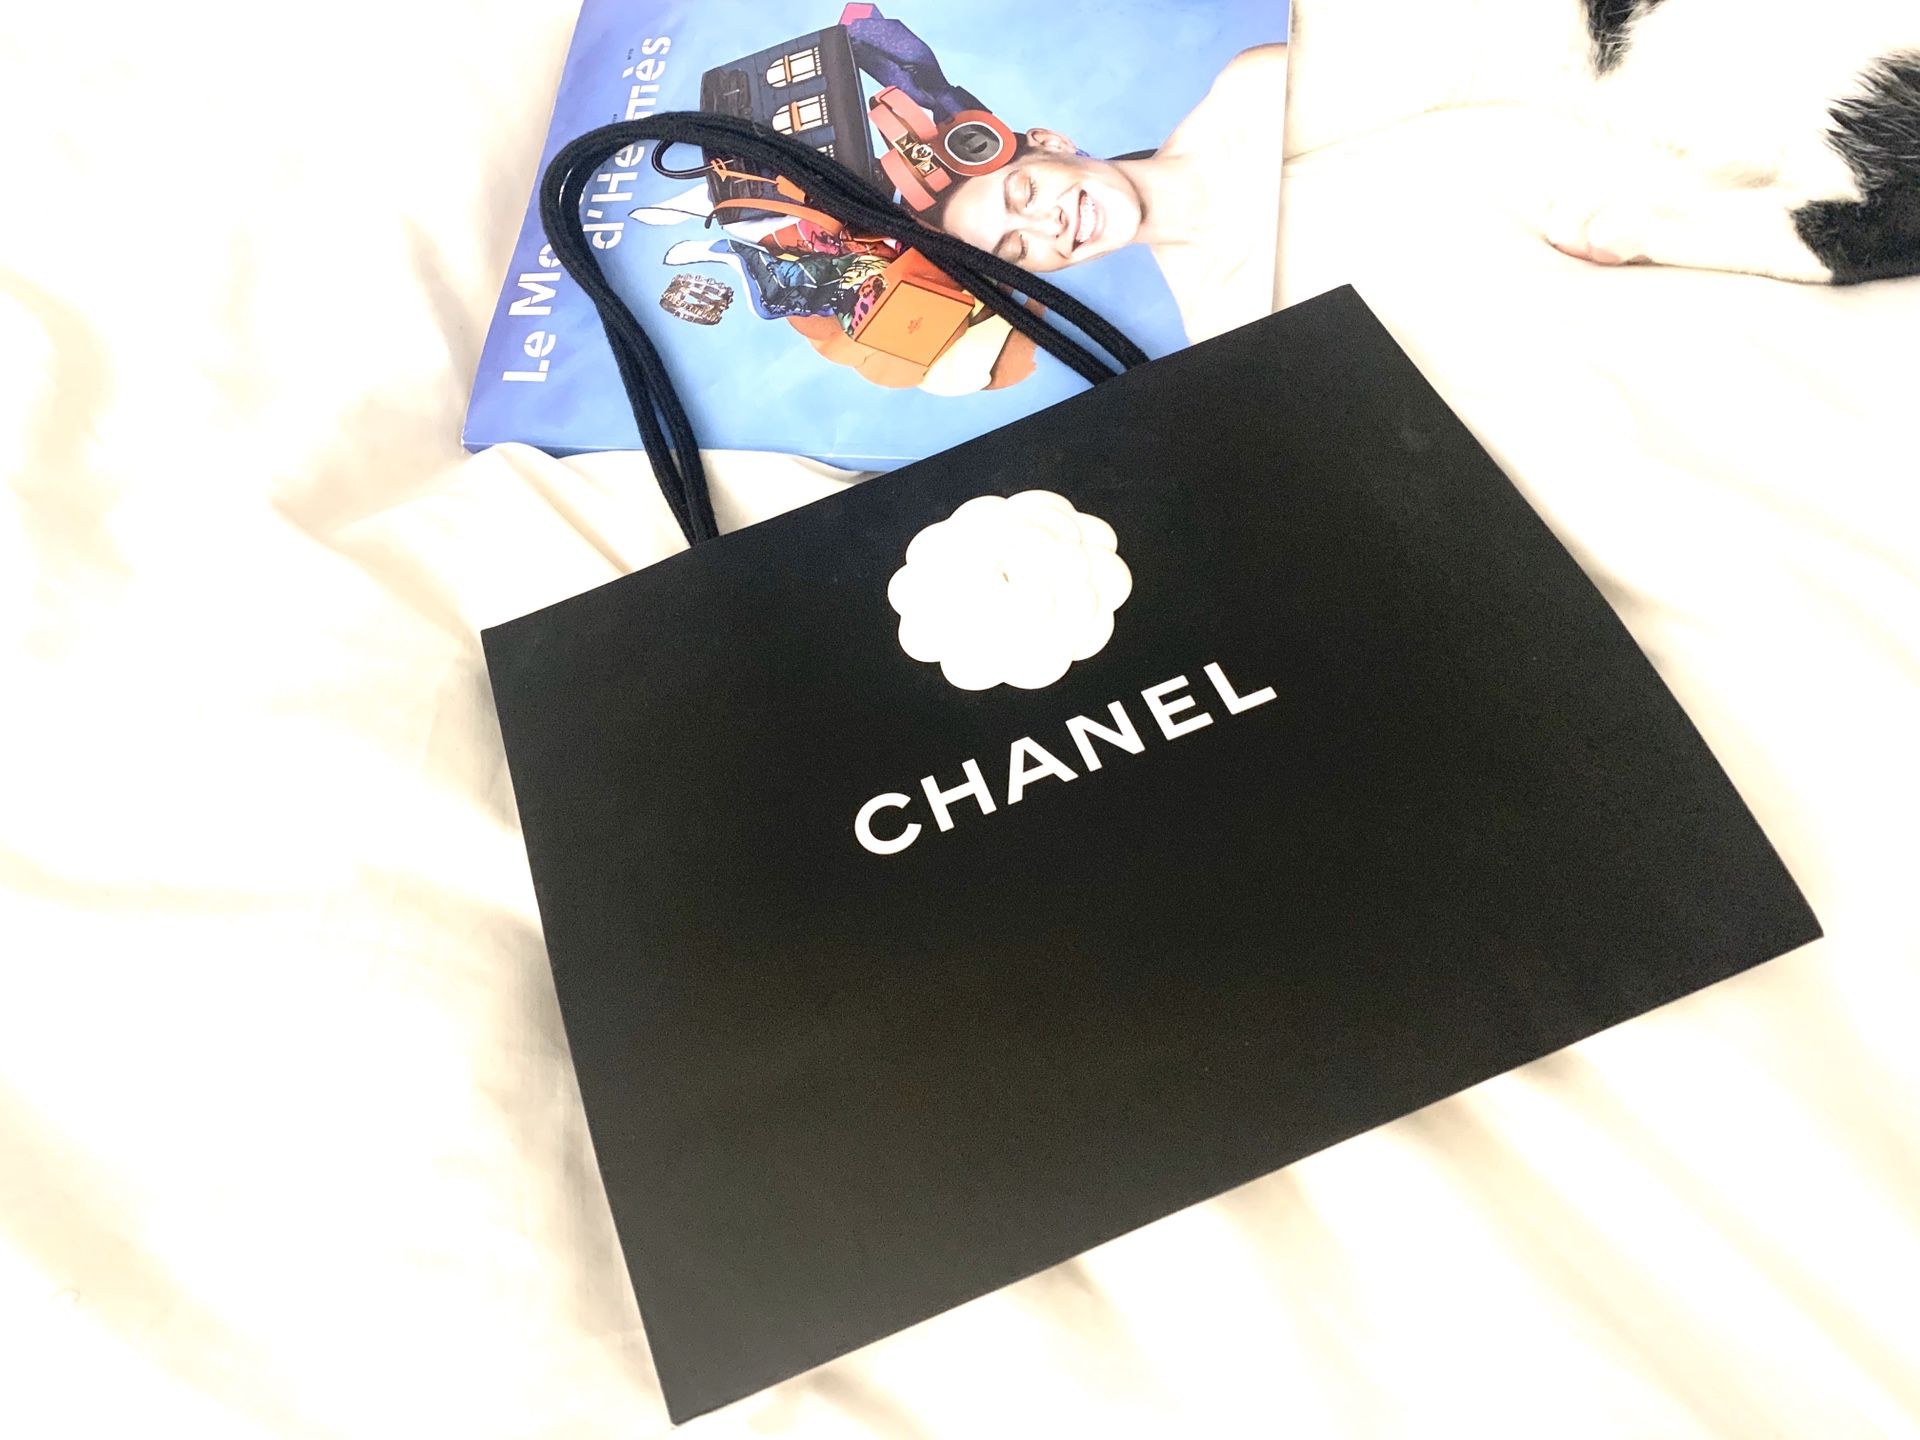 Authentic Chanel medium shopping bag, a paper box and a velvet cloth bag